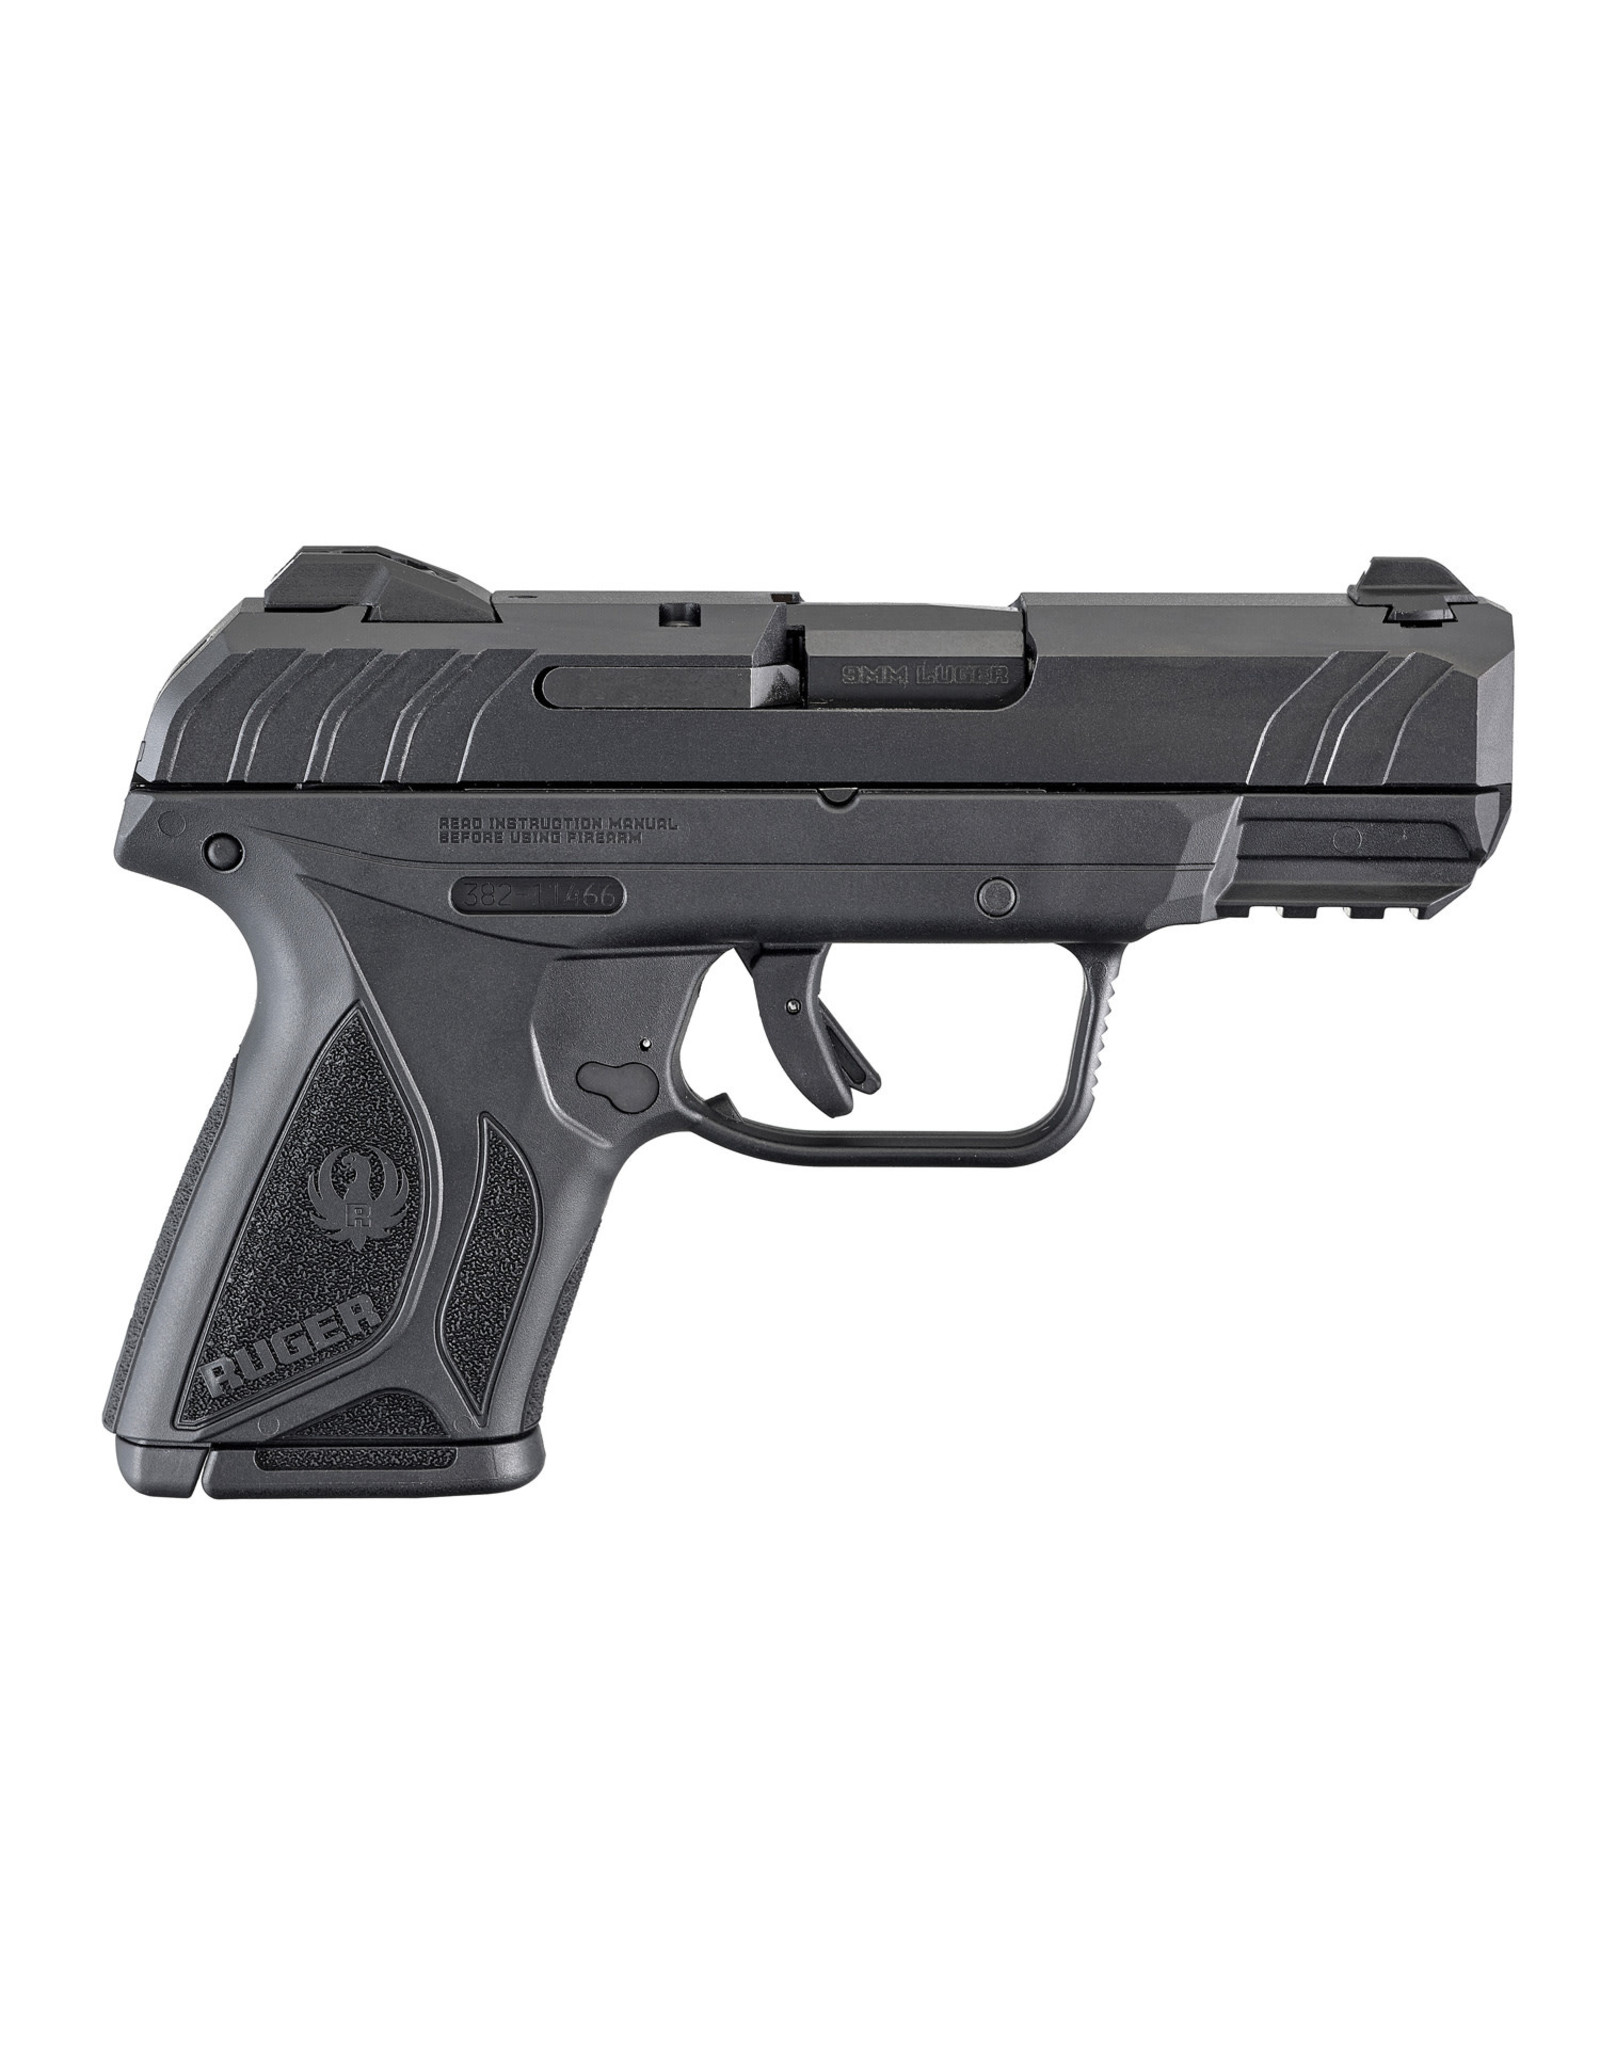 Ruger Security 9 Compact - 9mm